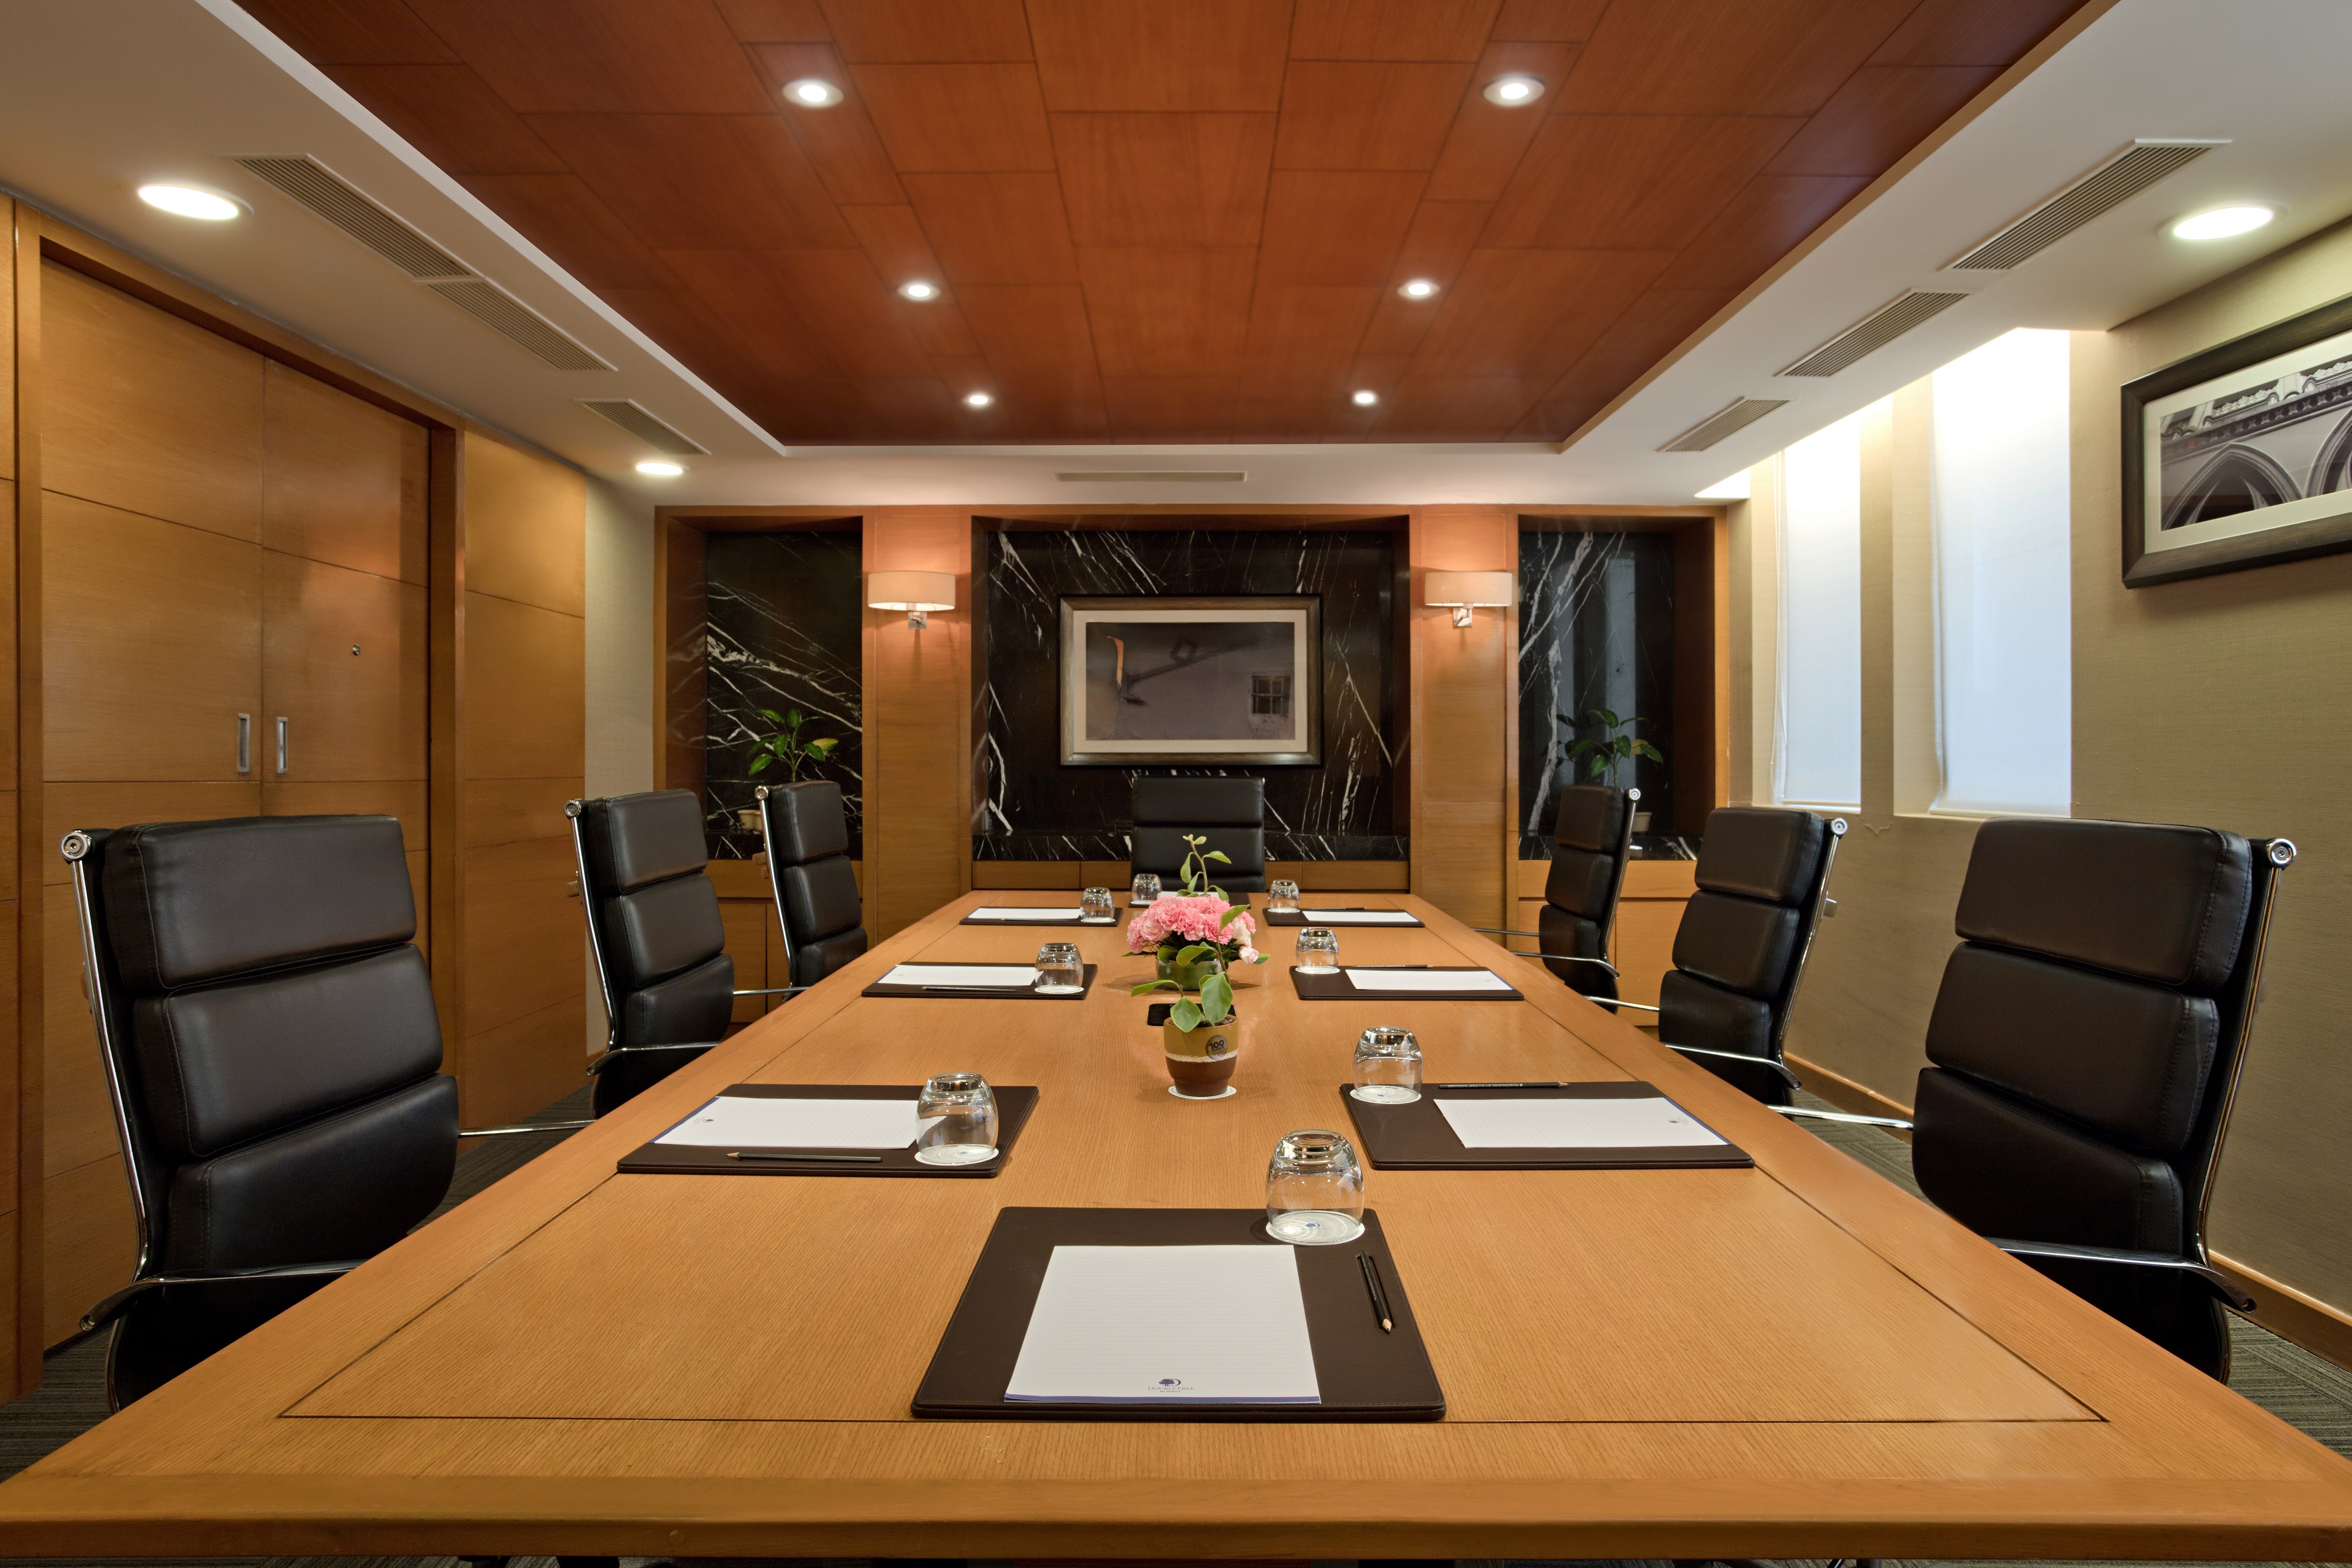 Boardroom area with tables and chairs